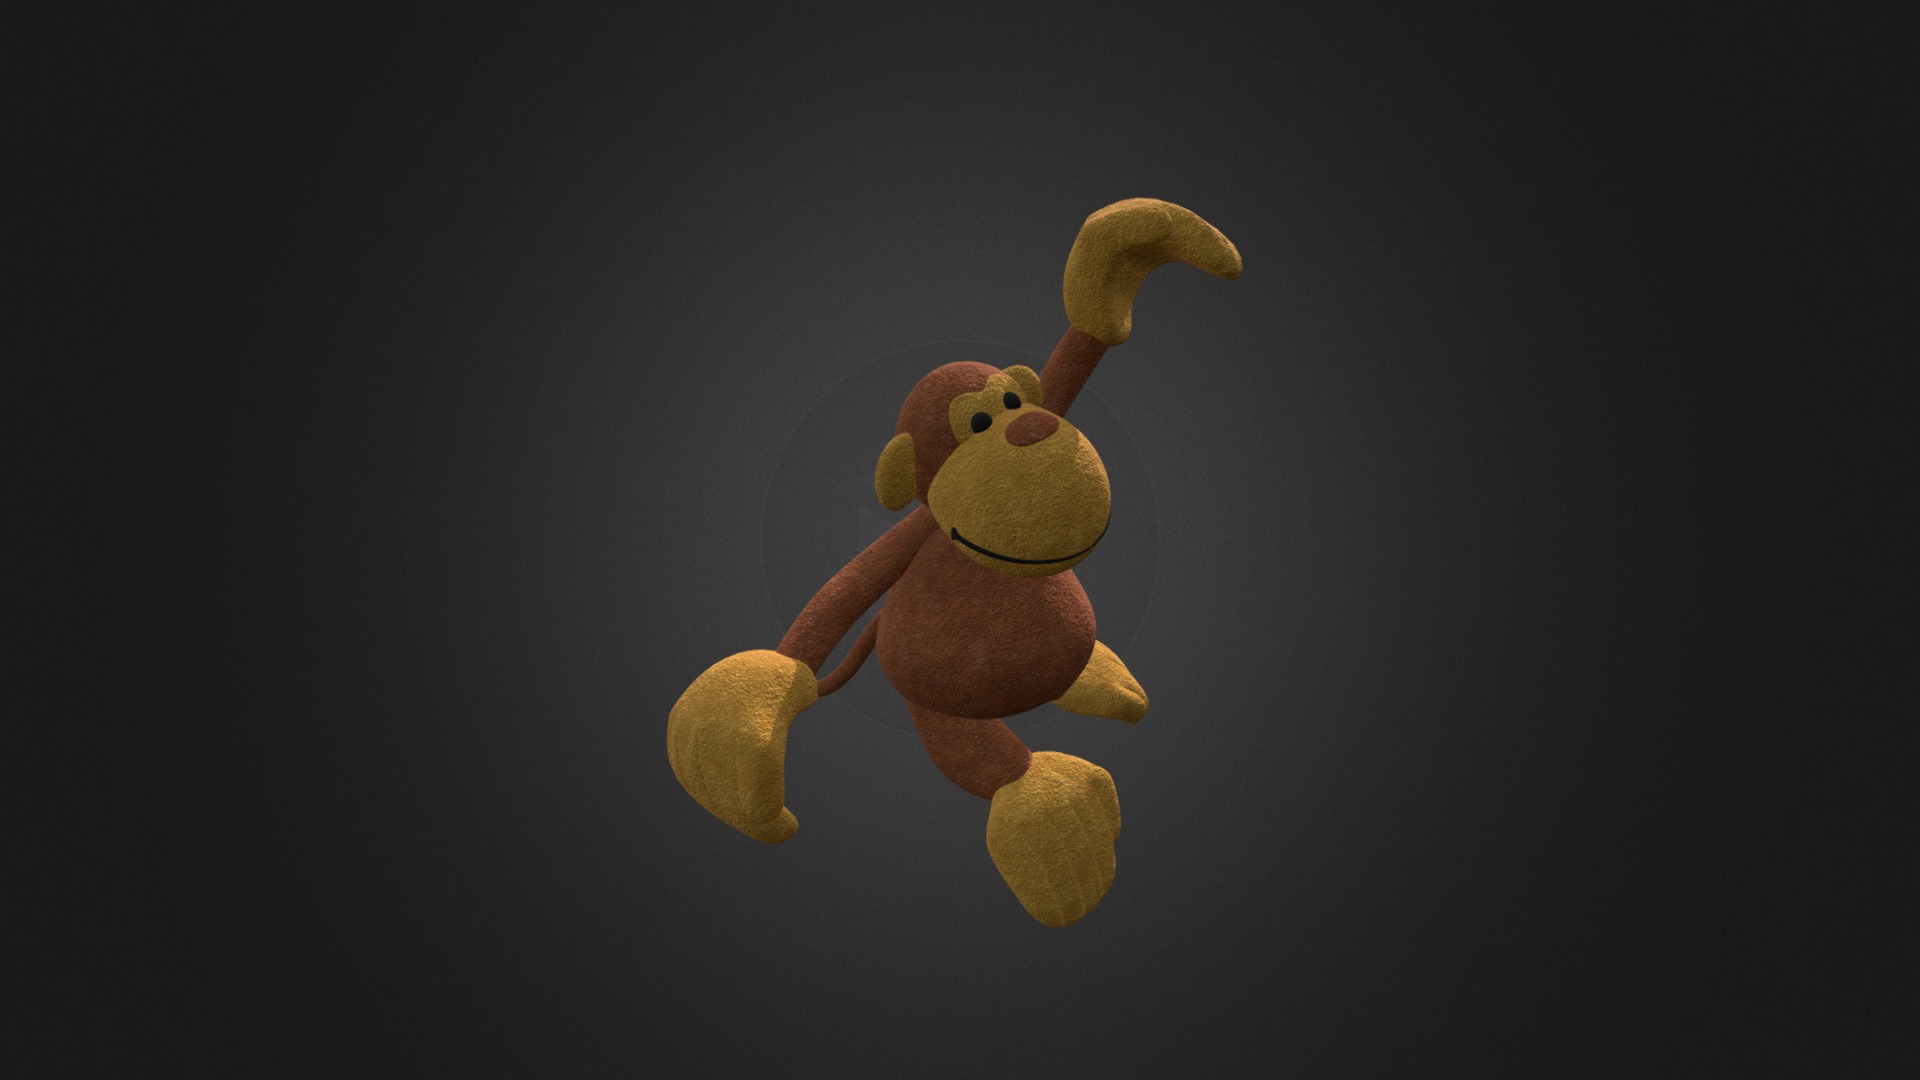 3D model Monkey Toy - This is a 3D model of the Monkey Toy. The 3D model is about a stuffed animal on a black background.